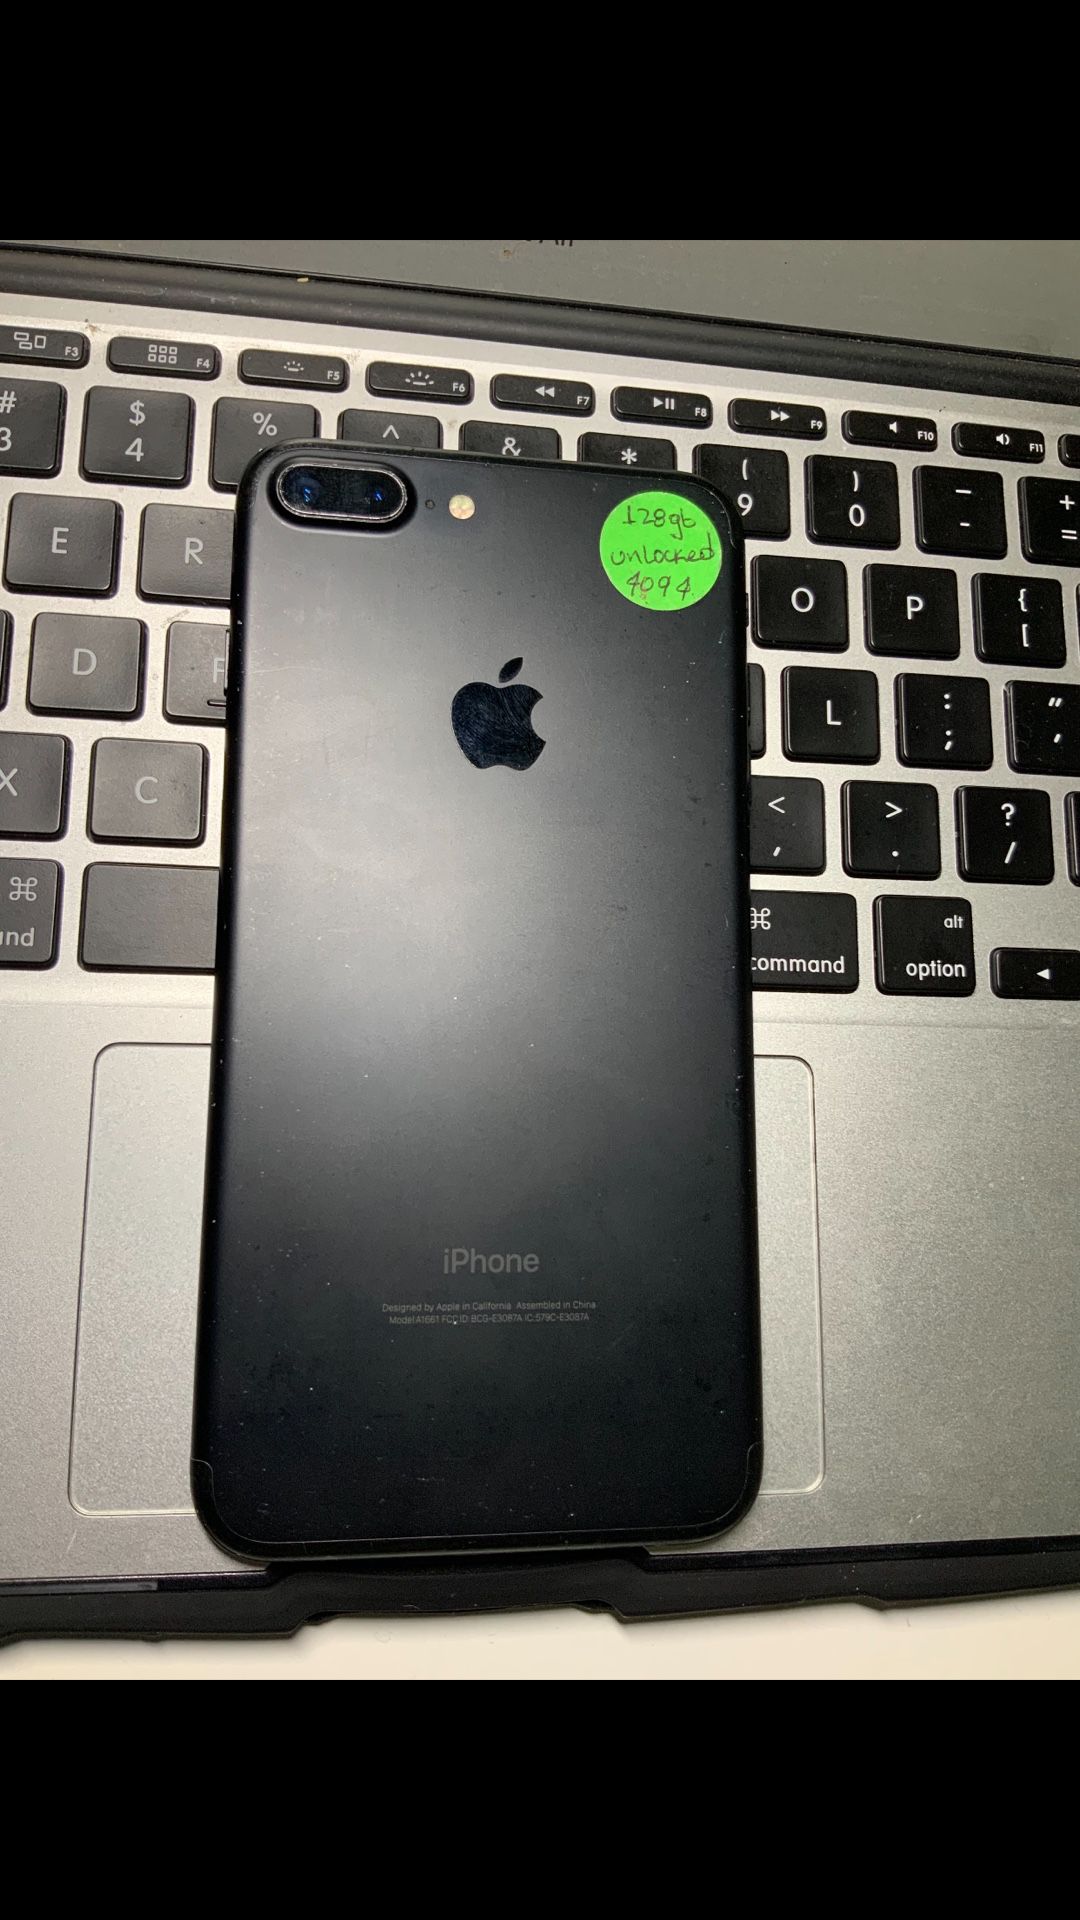 IPhone 7 Plus black color 128 gb used.Factory unlocked from Apple.Active to Tmobile,AT&T,Cricket,Metro PCs.What ever you want it.